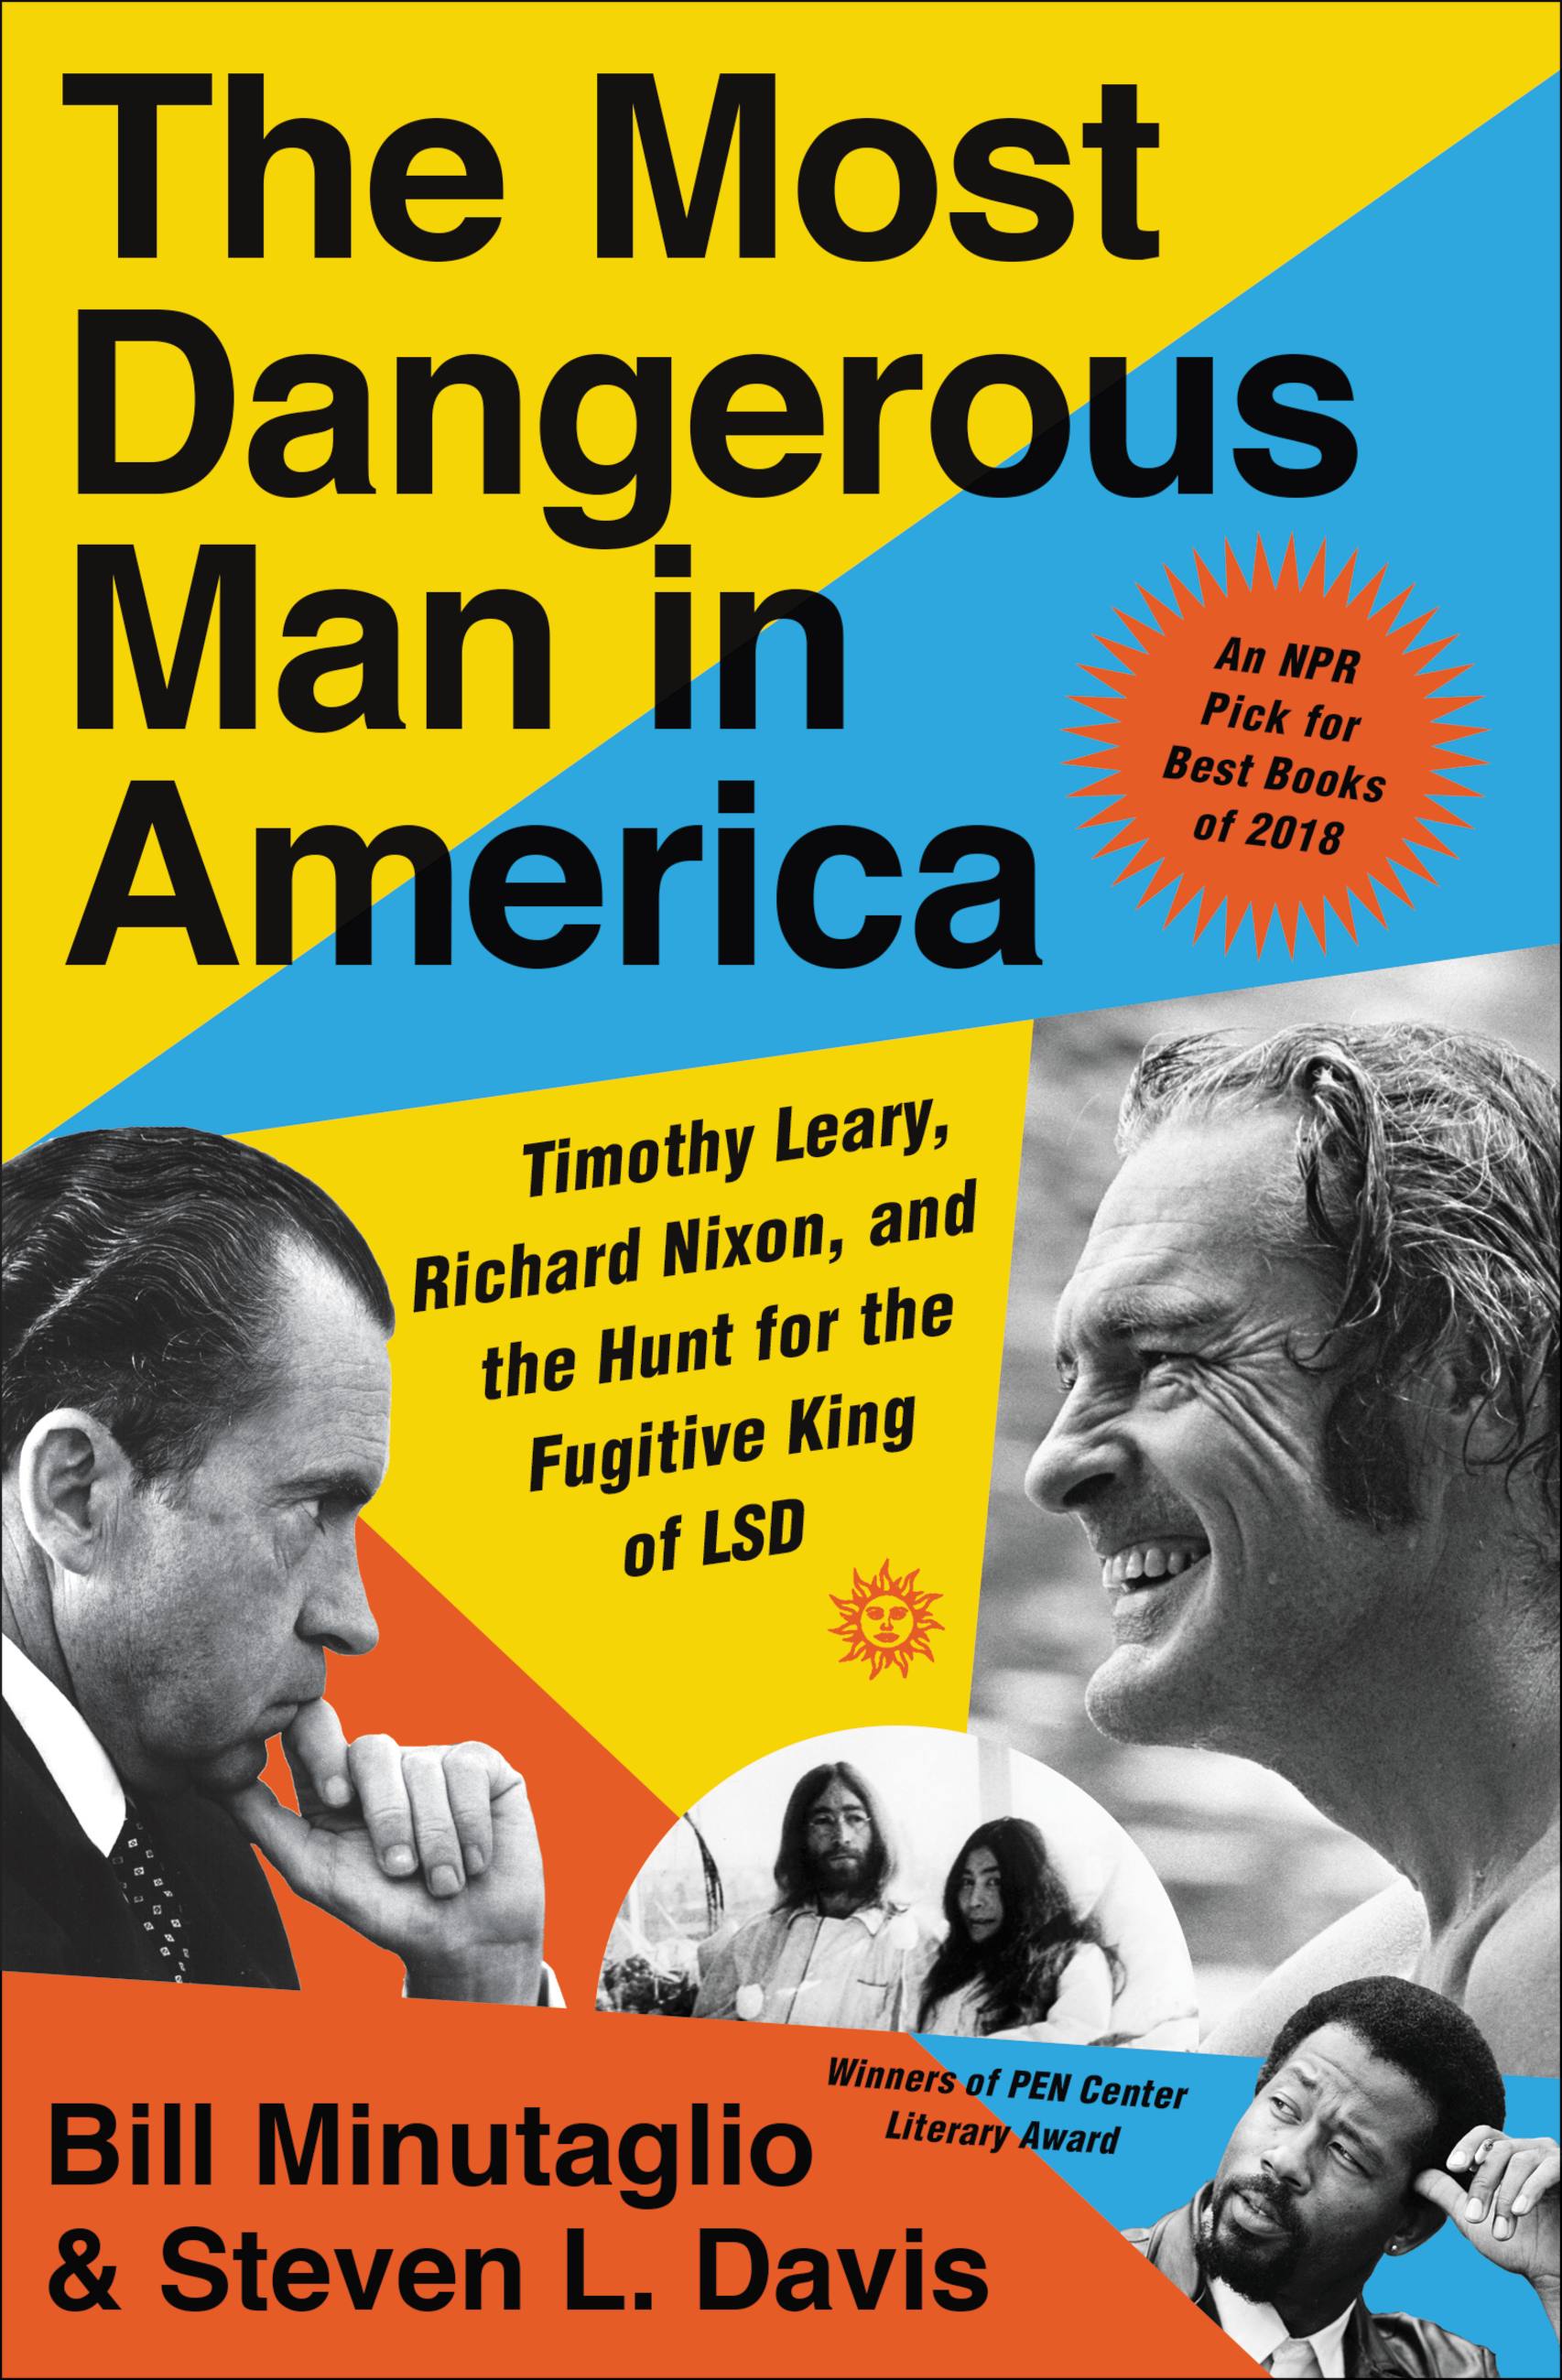 Image de couverture de The Most Dangerous Man in America [electronic resource] : Timothy Leary, Richard Nixon and the Hunt for the Fugitive King of LSD